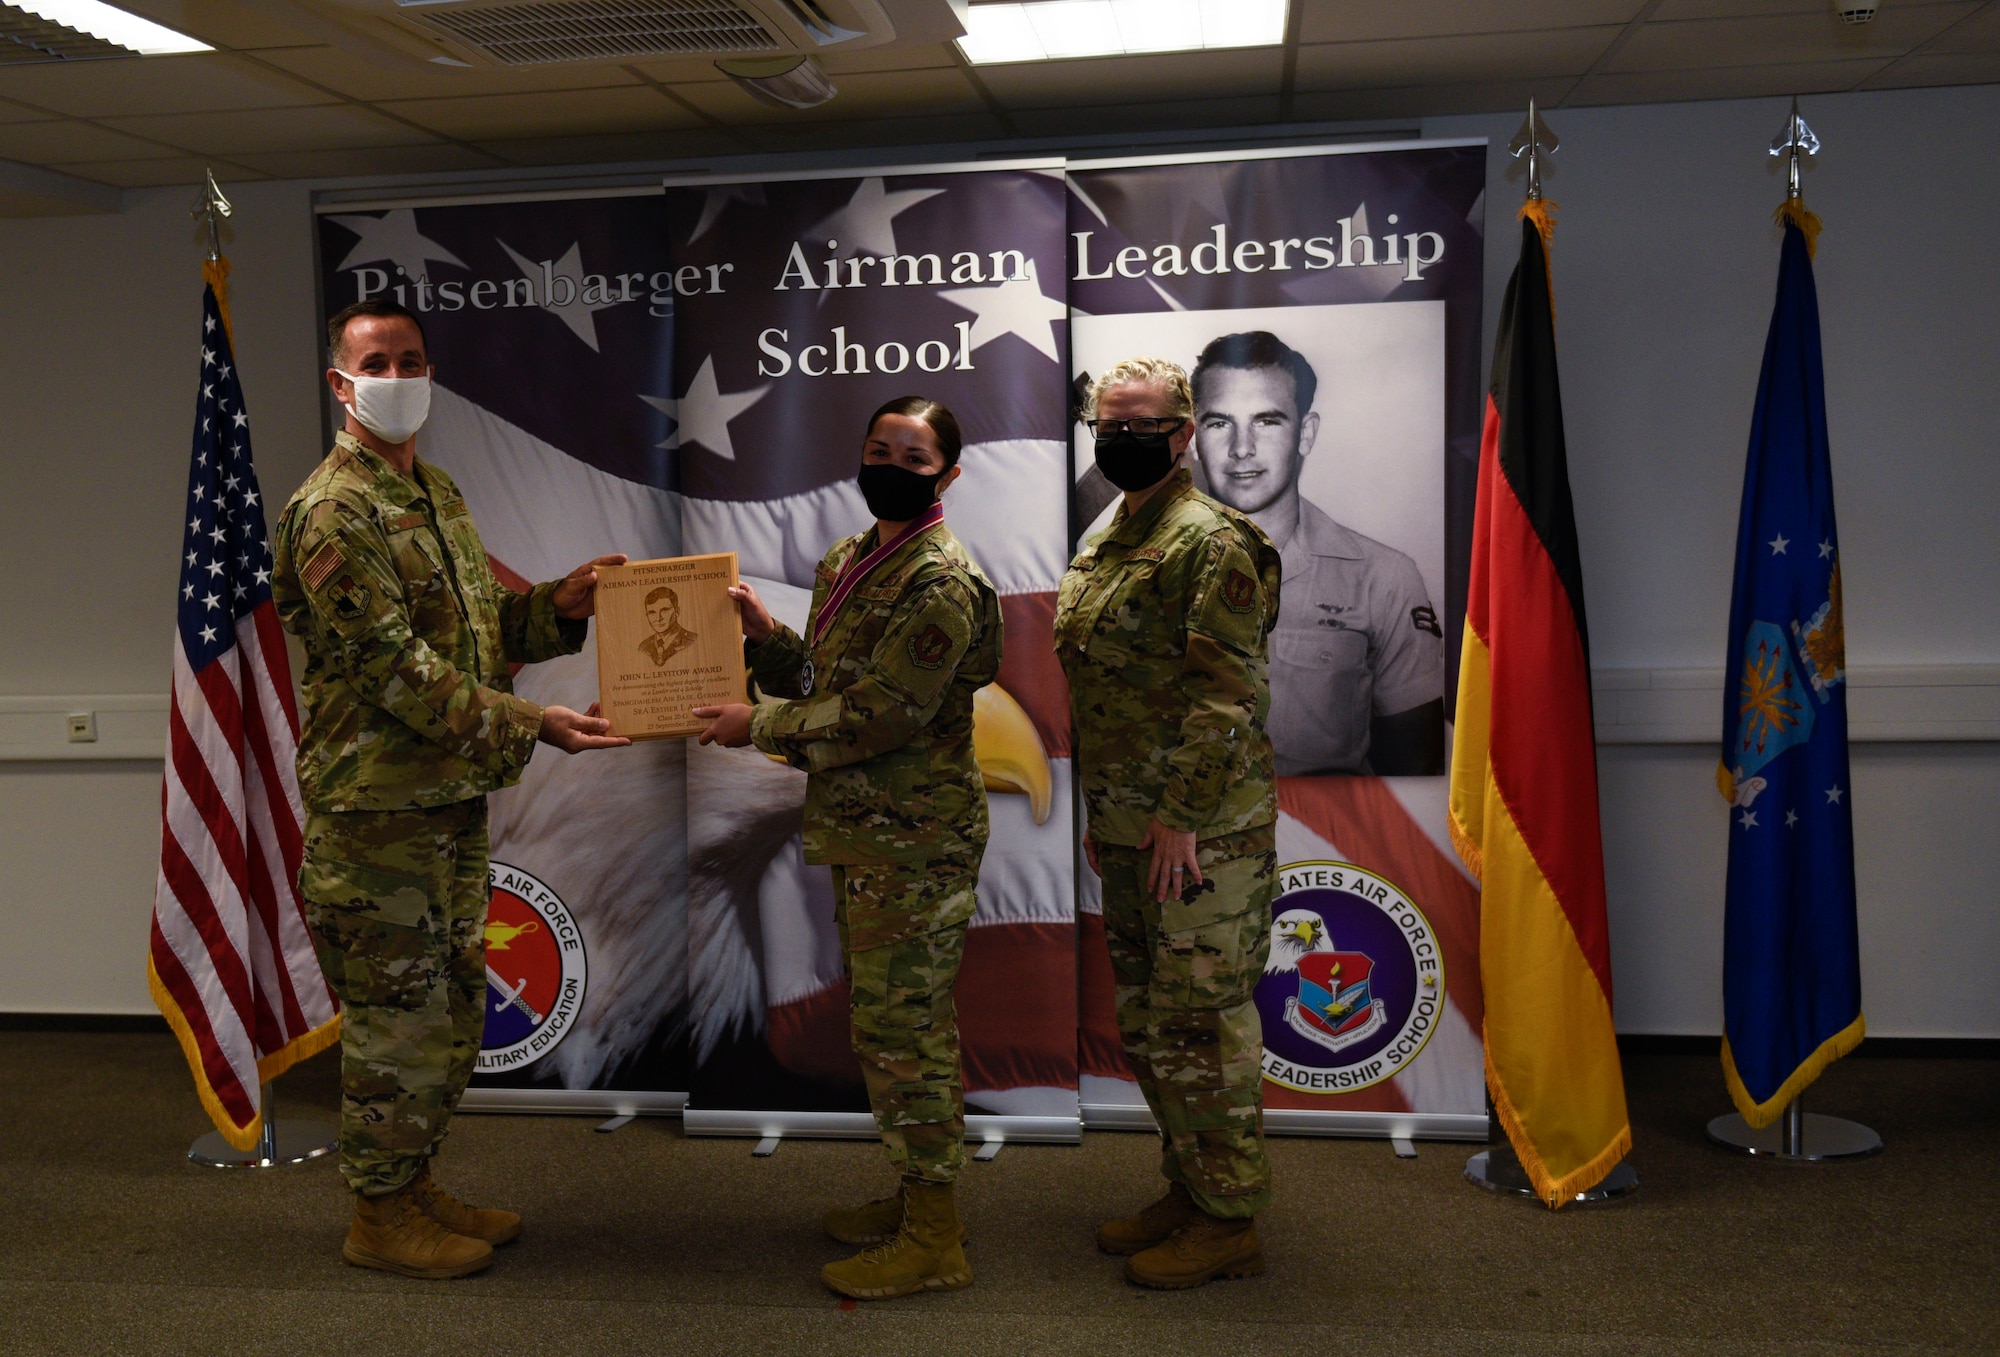 U.S. Air Force Col. Jason Hokaj, 52nd Fighter Wing vice commander, left, presents the John L. Levitow award to Senior Airman Esther Ababa, 52nd Fighter Wing Command Post member, during the Pitsenbarger Airman Leadership School class 20-G graduation at Spangdahlem Air Base, Germany, September 25, 2020. The award is given to the ALS graduate who demonstrates the most outstanding professional leadership and academic performance. (U.S. Air Force photo by Senior Airman Melody W. Howley)